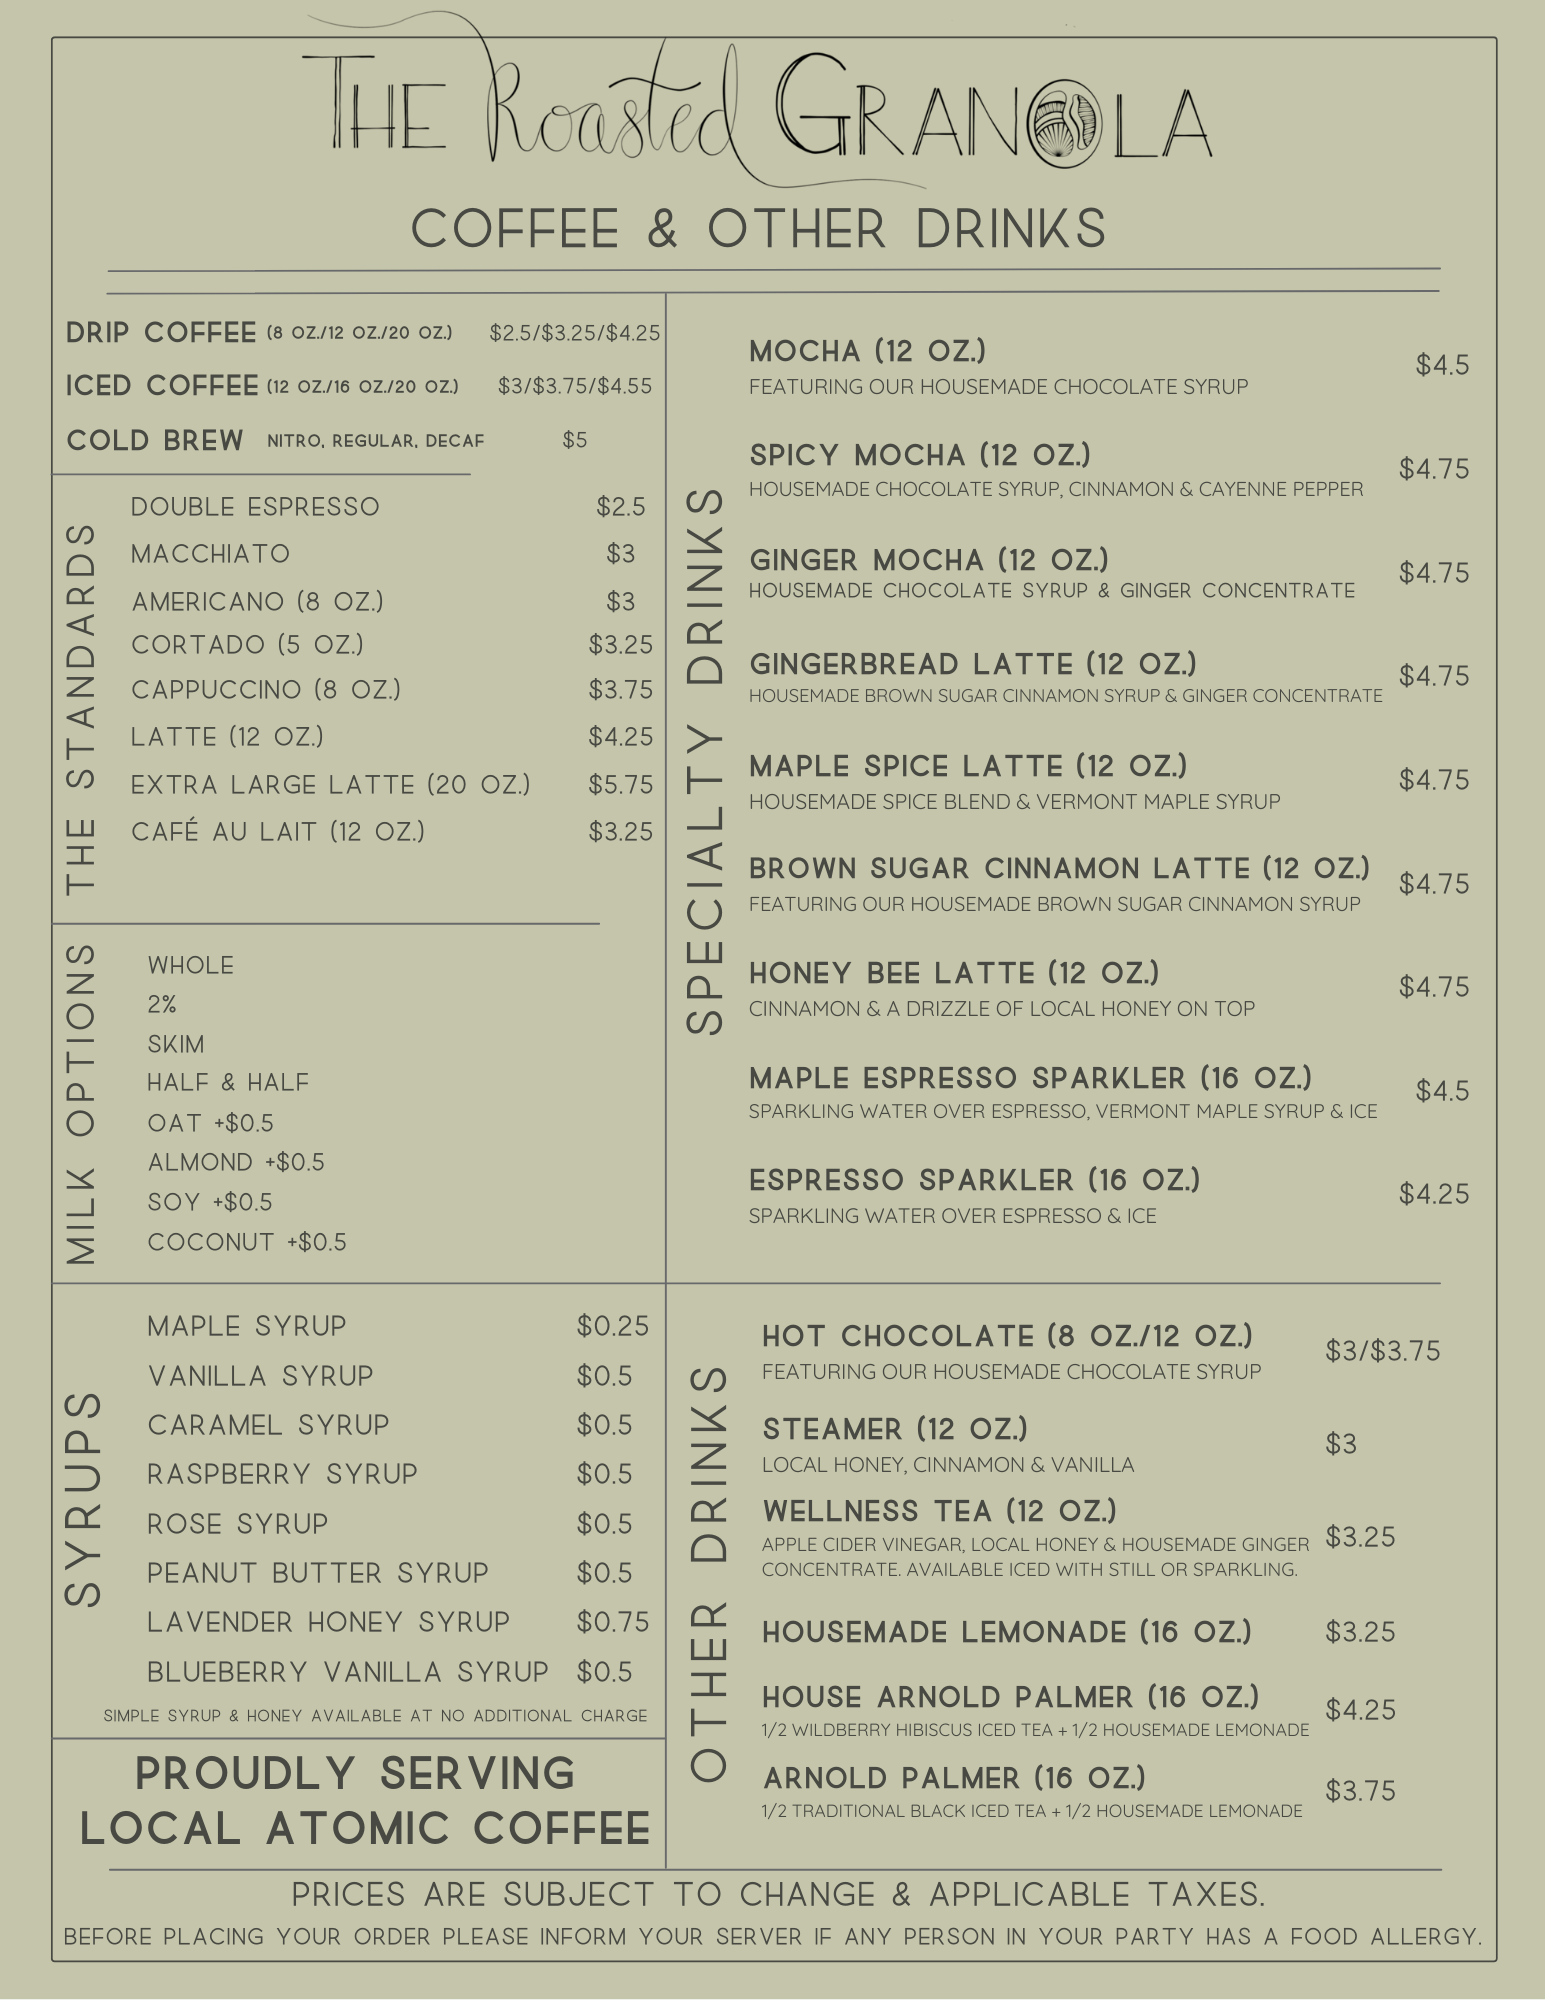 Coffee & other drinks